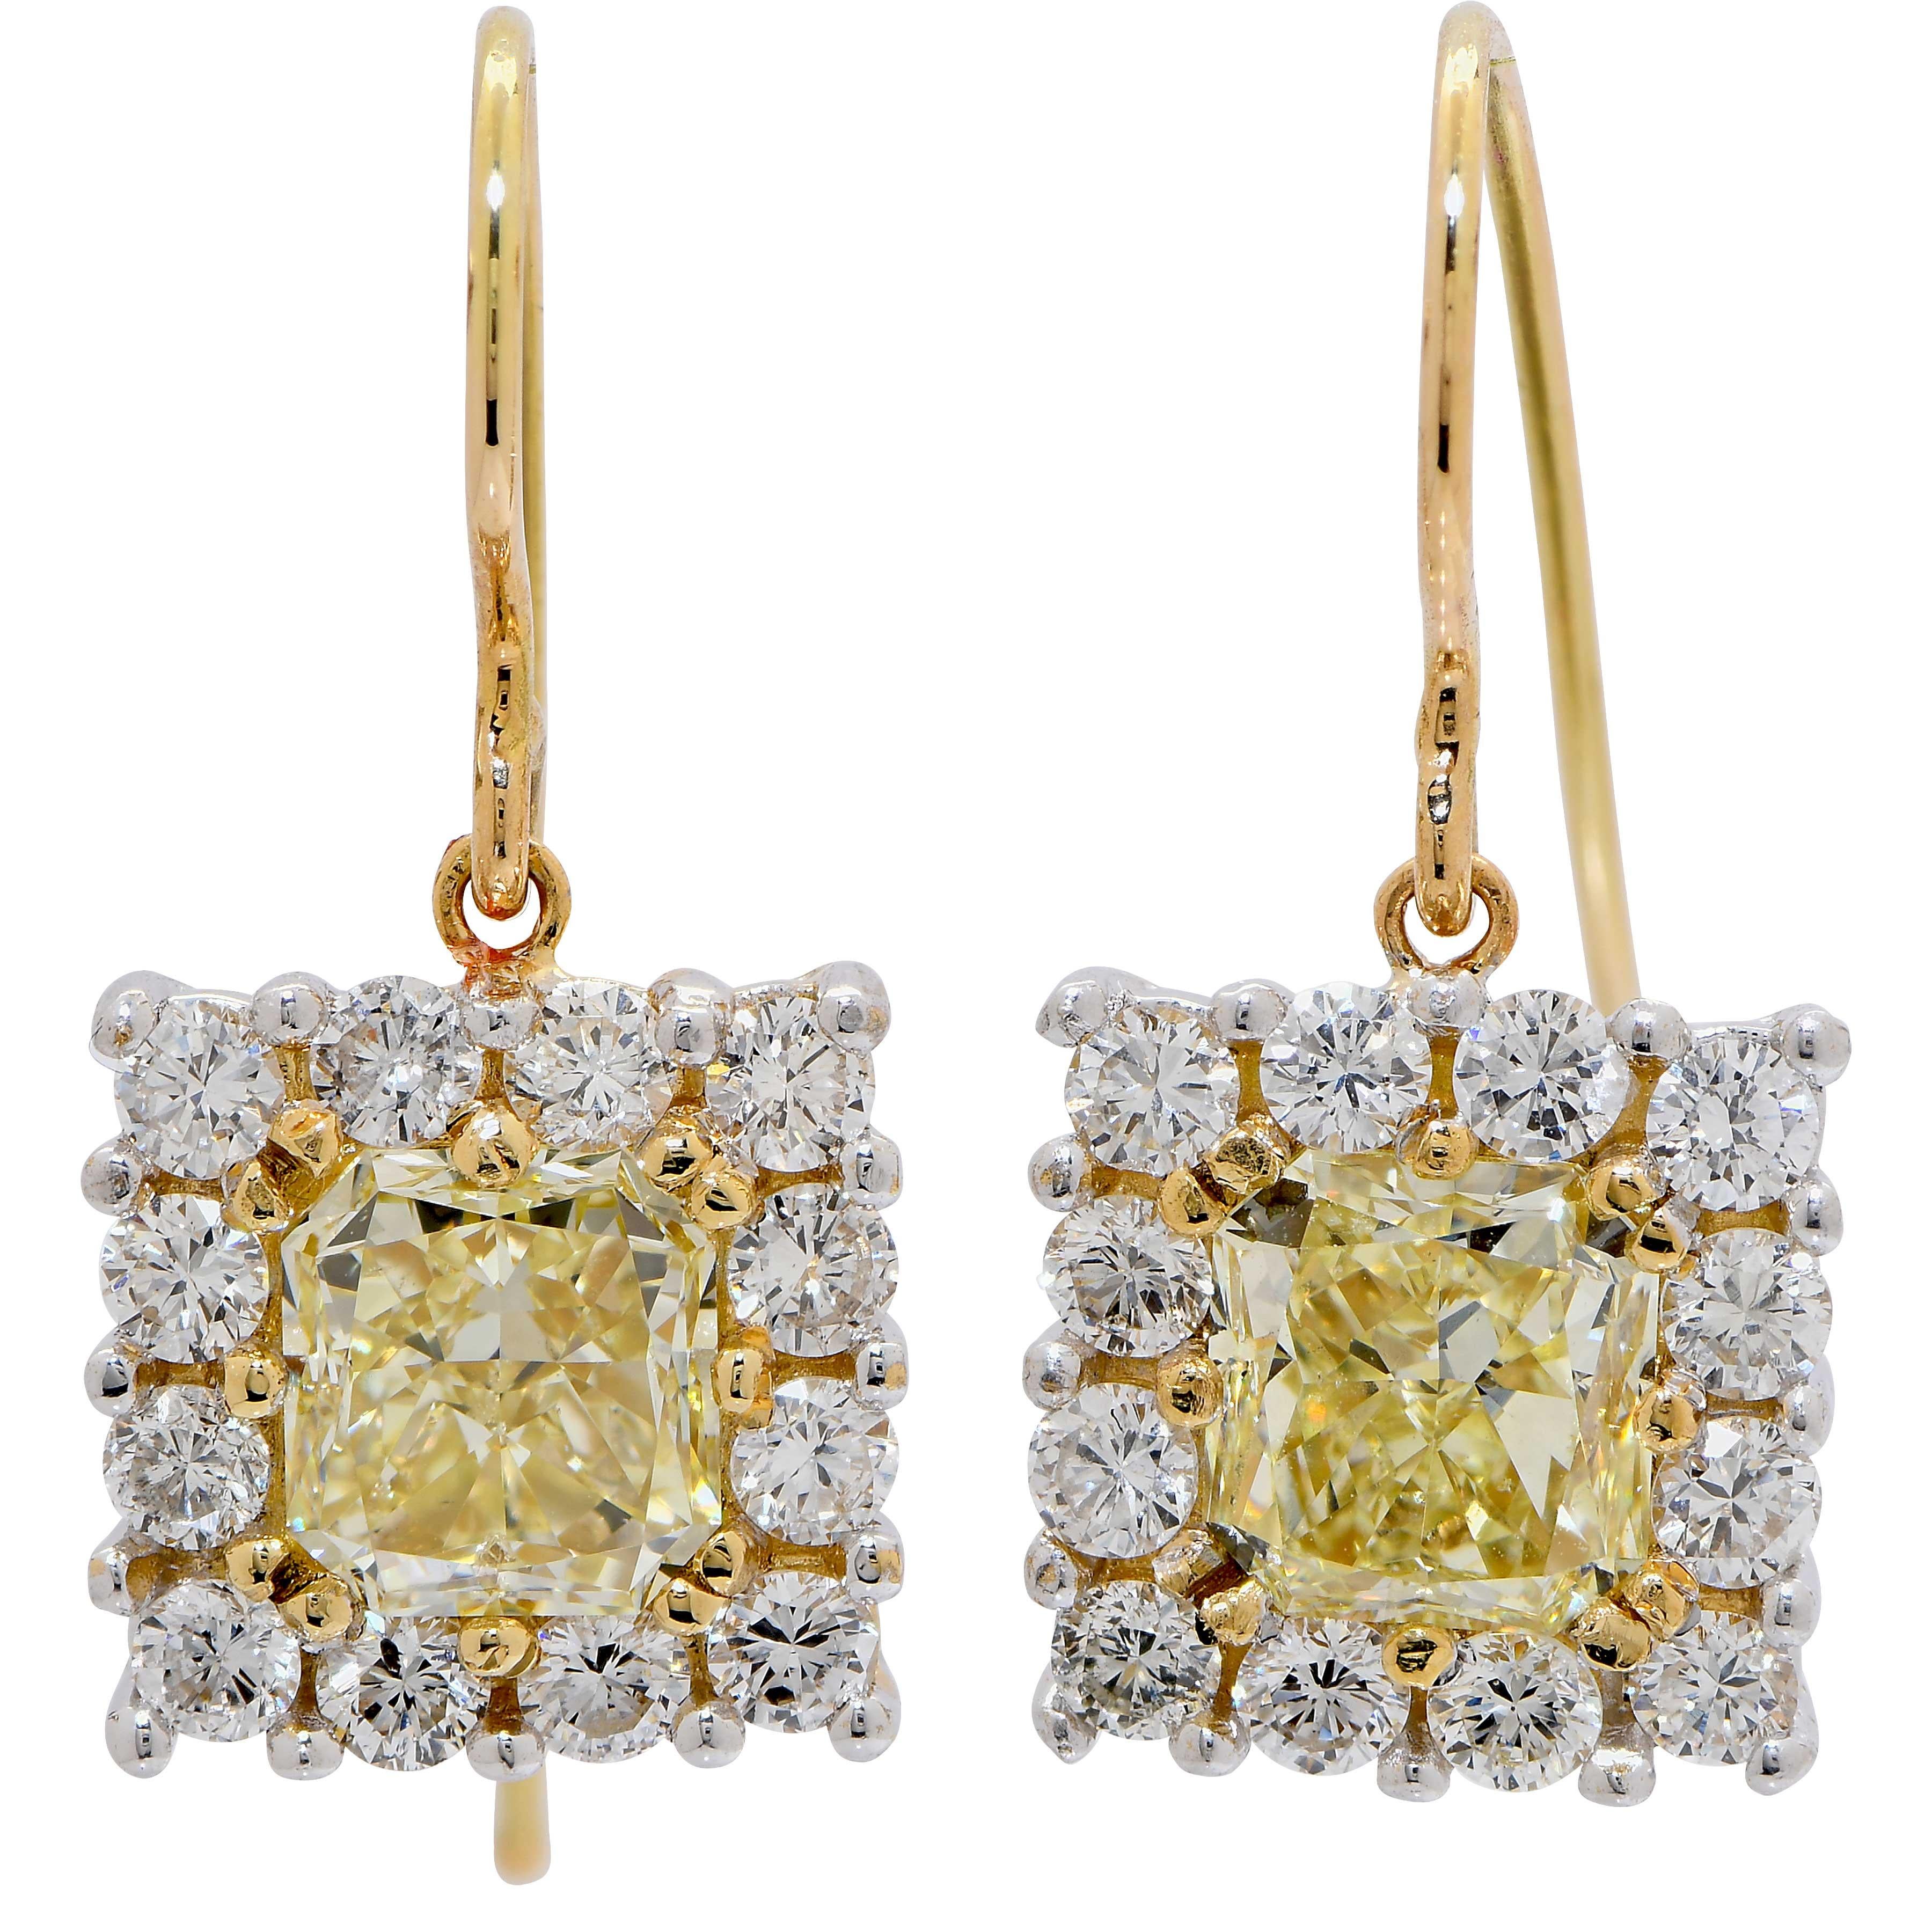 4.15 Carat Yellow and White Diamond Drop Earrings in 18 Carat Yellow Gold. These whimsical earrings feature two radiant cut yellow diamonds with a total weight of 3.02 carats and 24 white round diamonds with a total weight of 1.03 carats. 
Metal